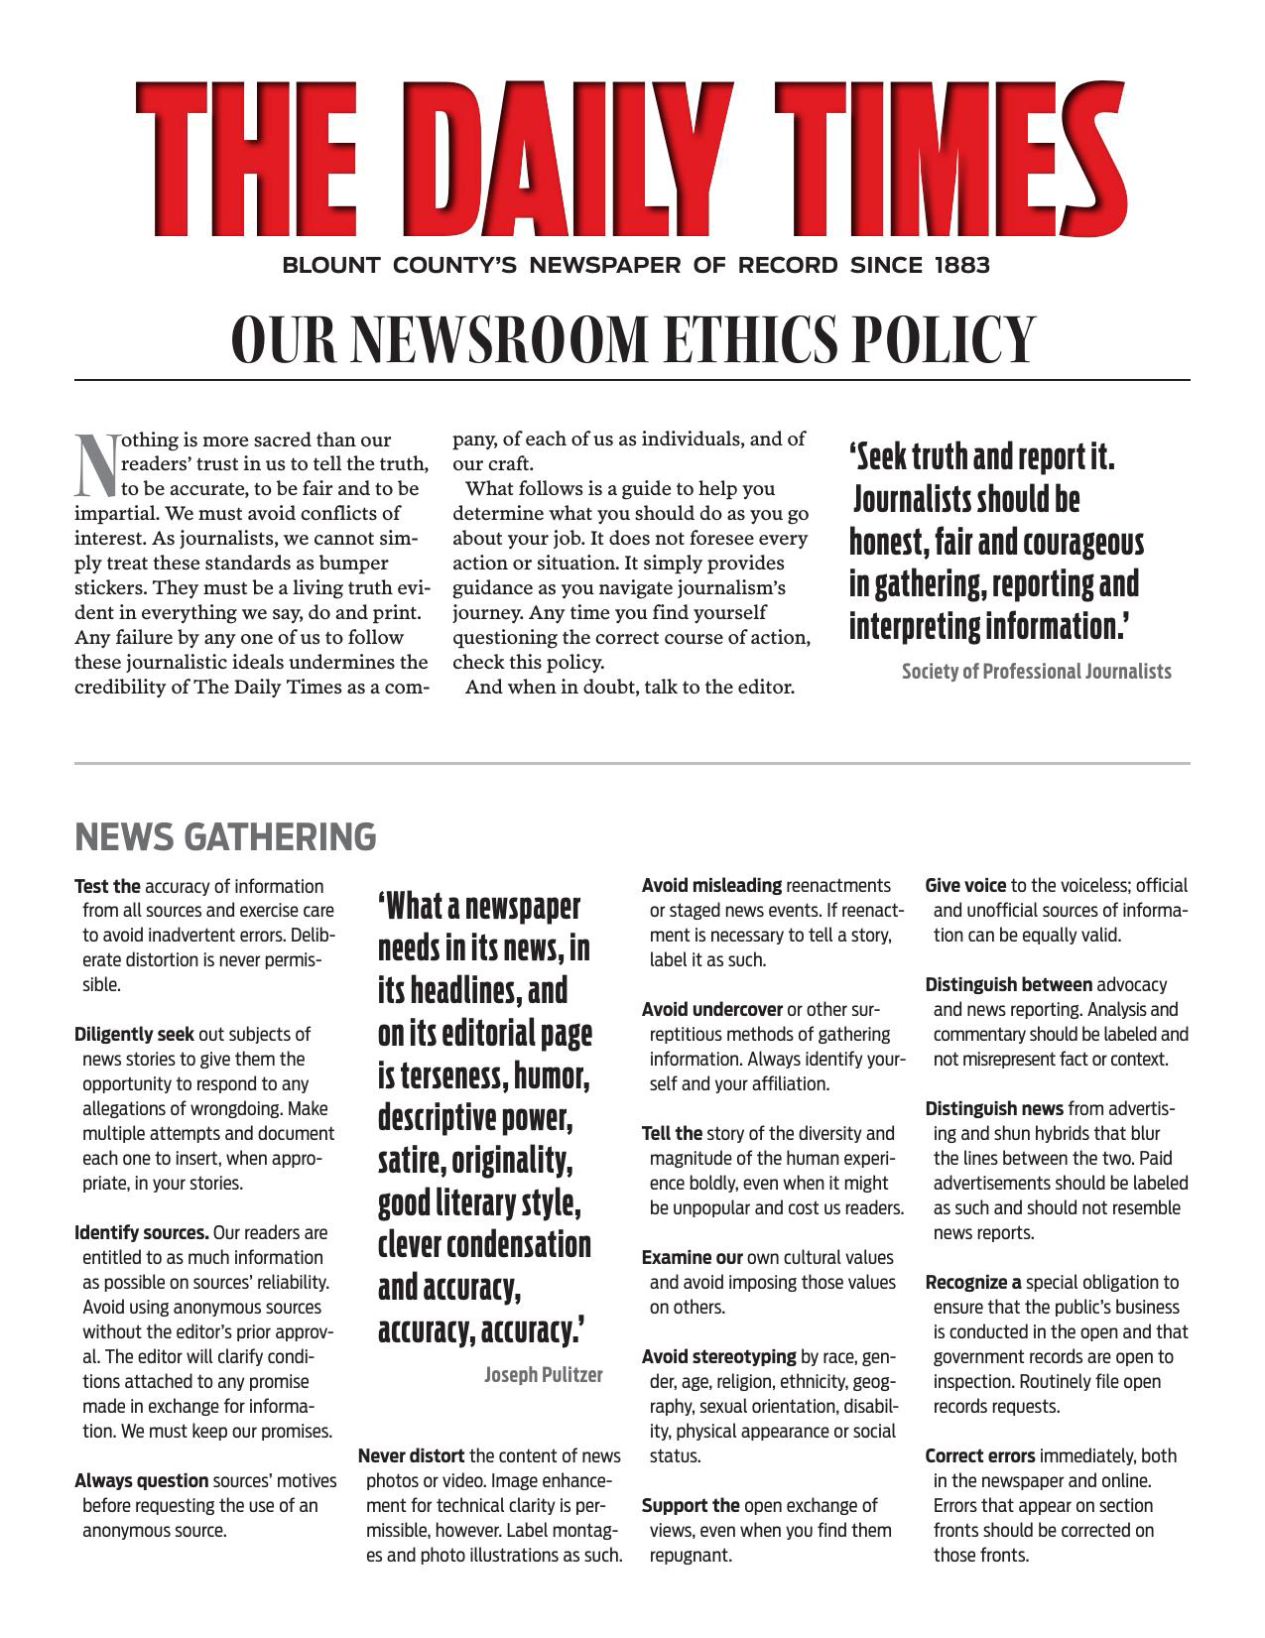 The Daily Times Journalistic Ethics Code